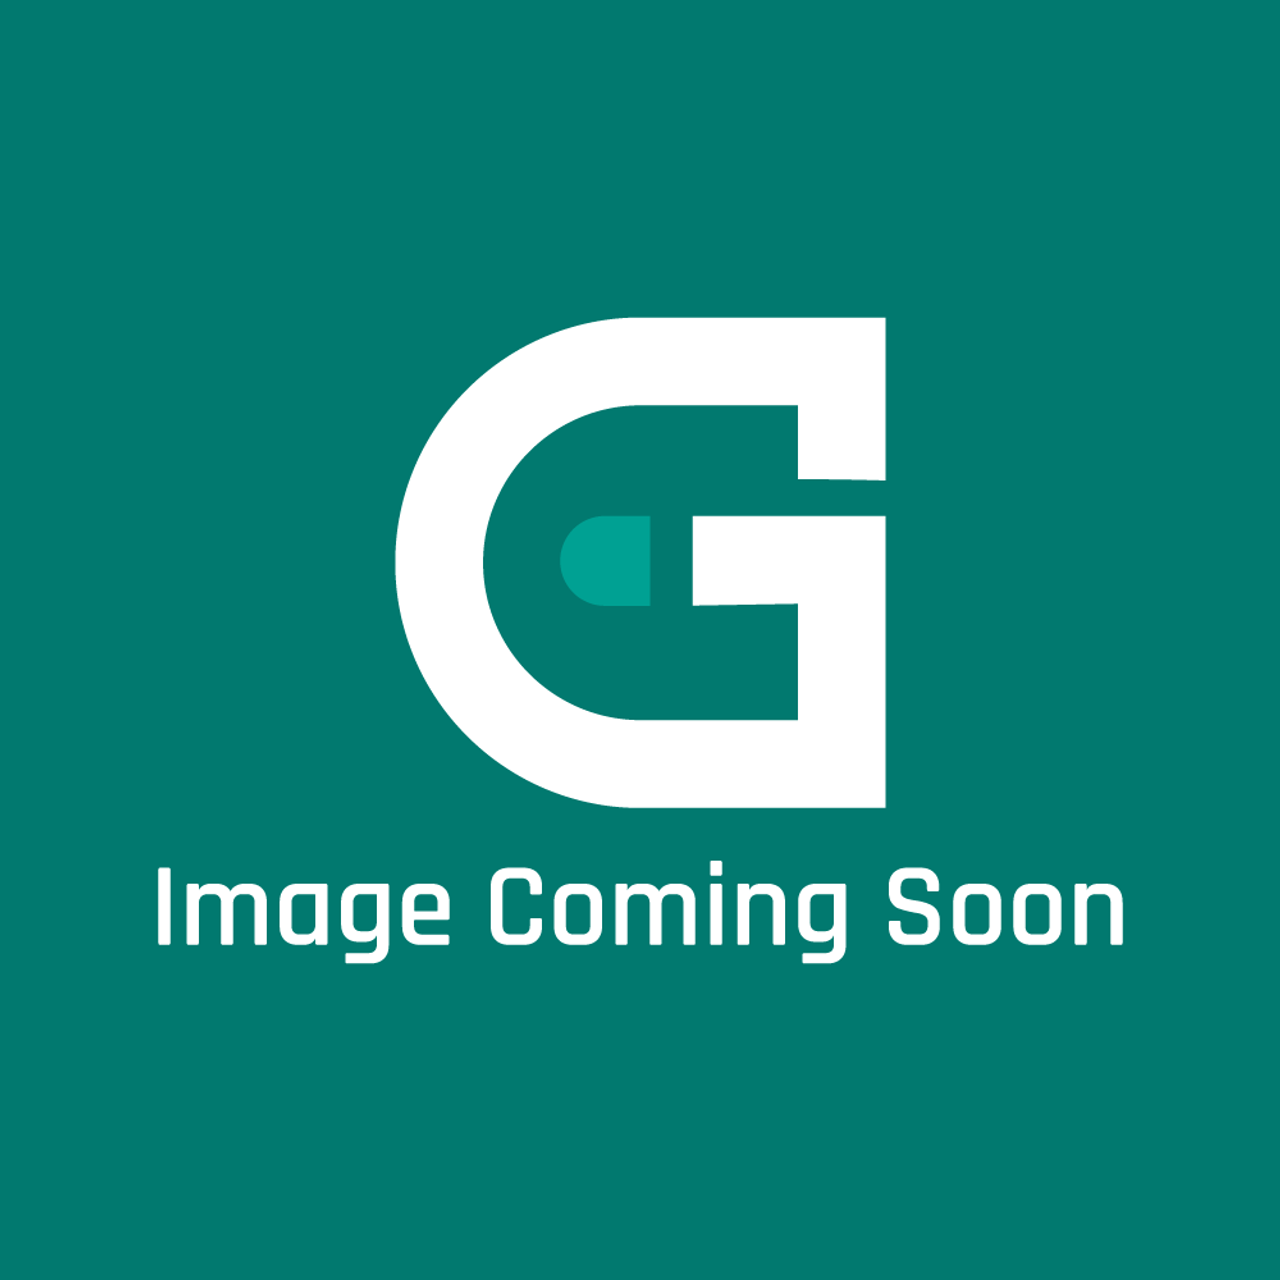 AGA Marvel S6198 - S/A-Switch - Range Light - Image Coming Soon!